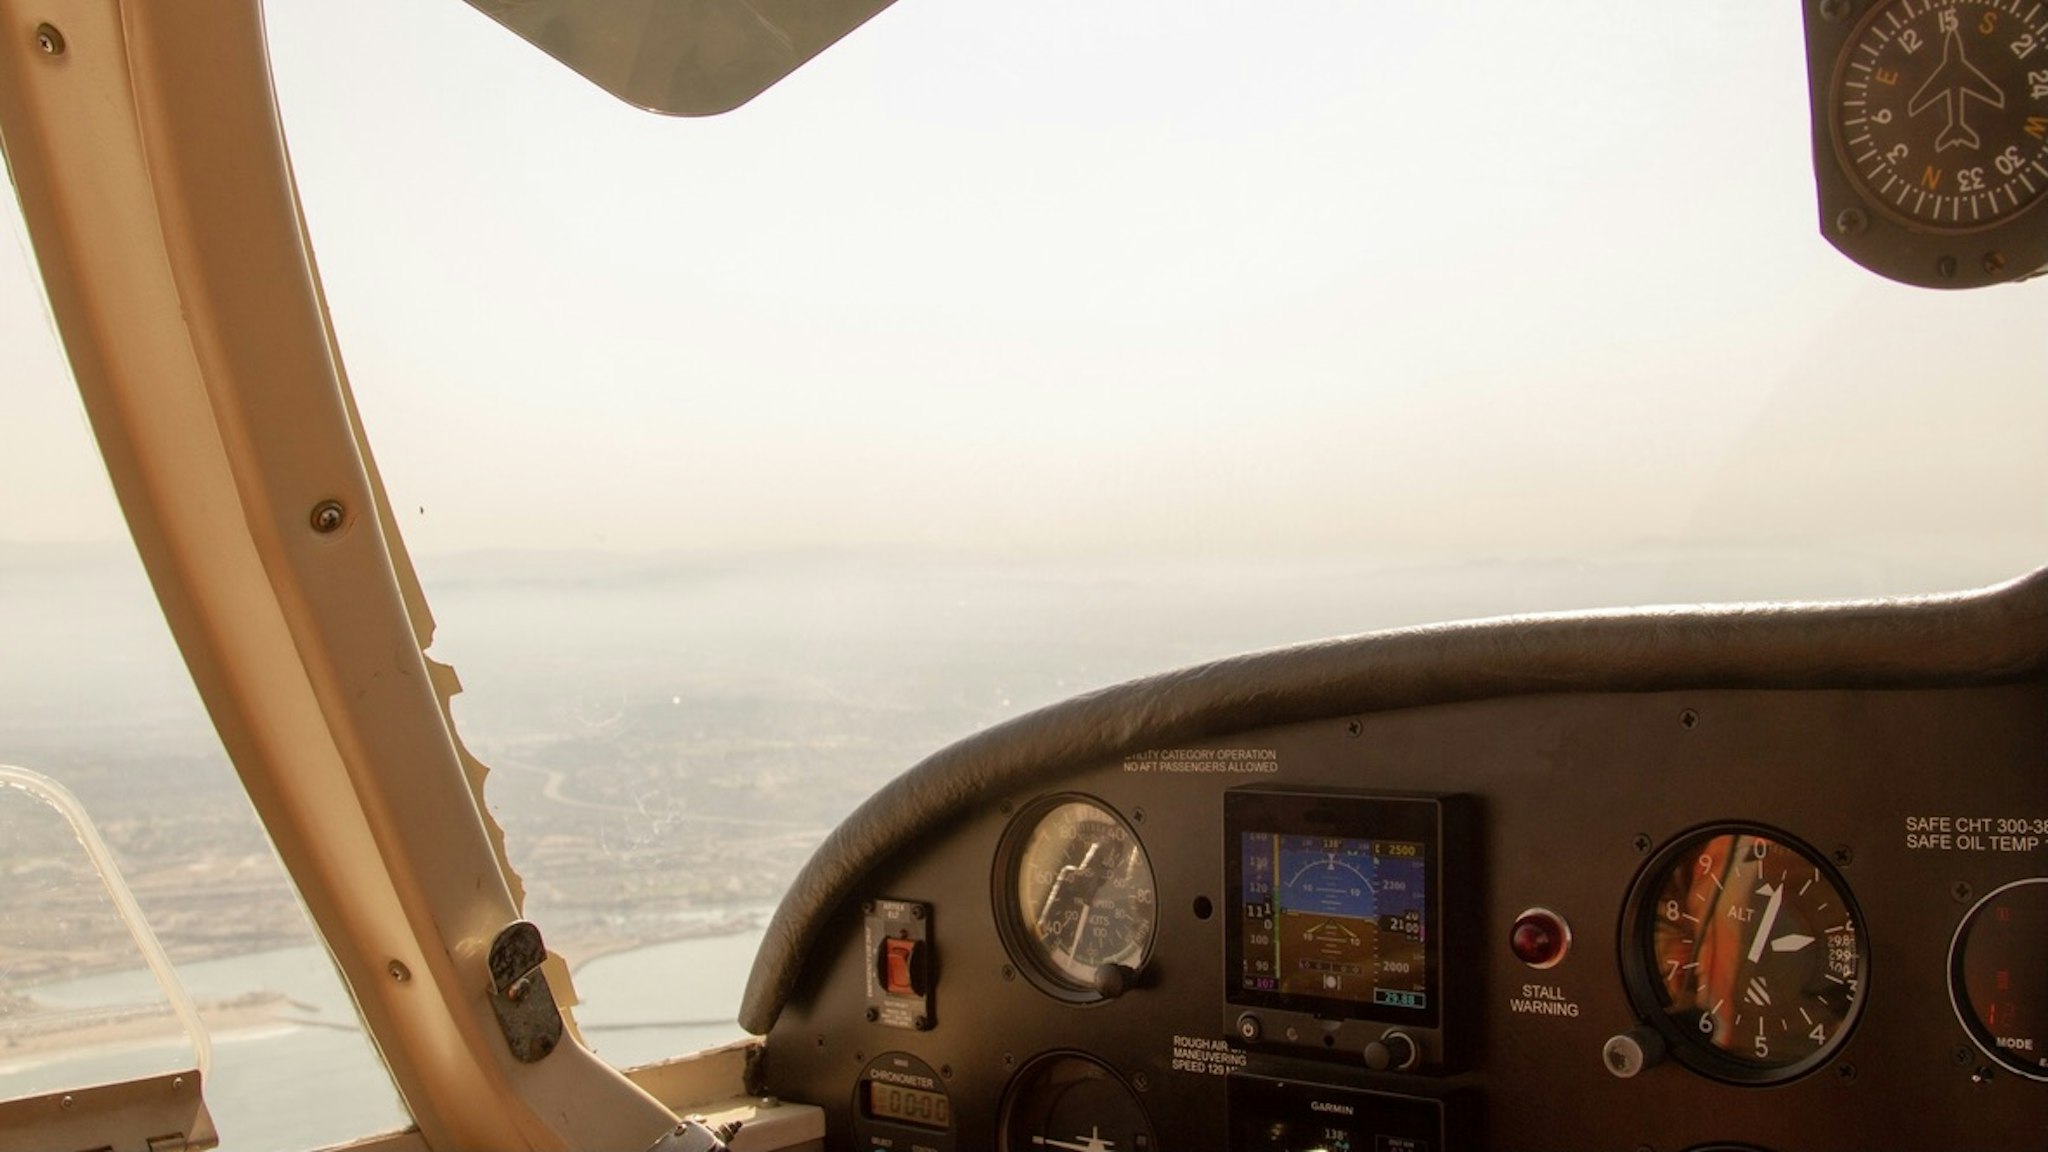 Pilot view from the cockpit of a single-engine, propellor airplane - stock photo View from cockpit over the coast of San Diego County, California. All logos removed. Raquel Lonas via Getty Images